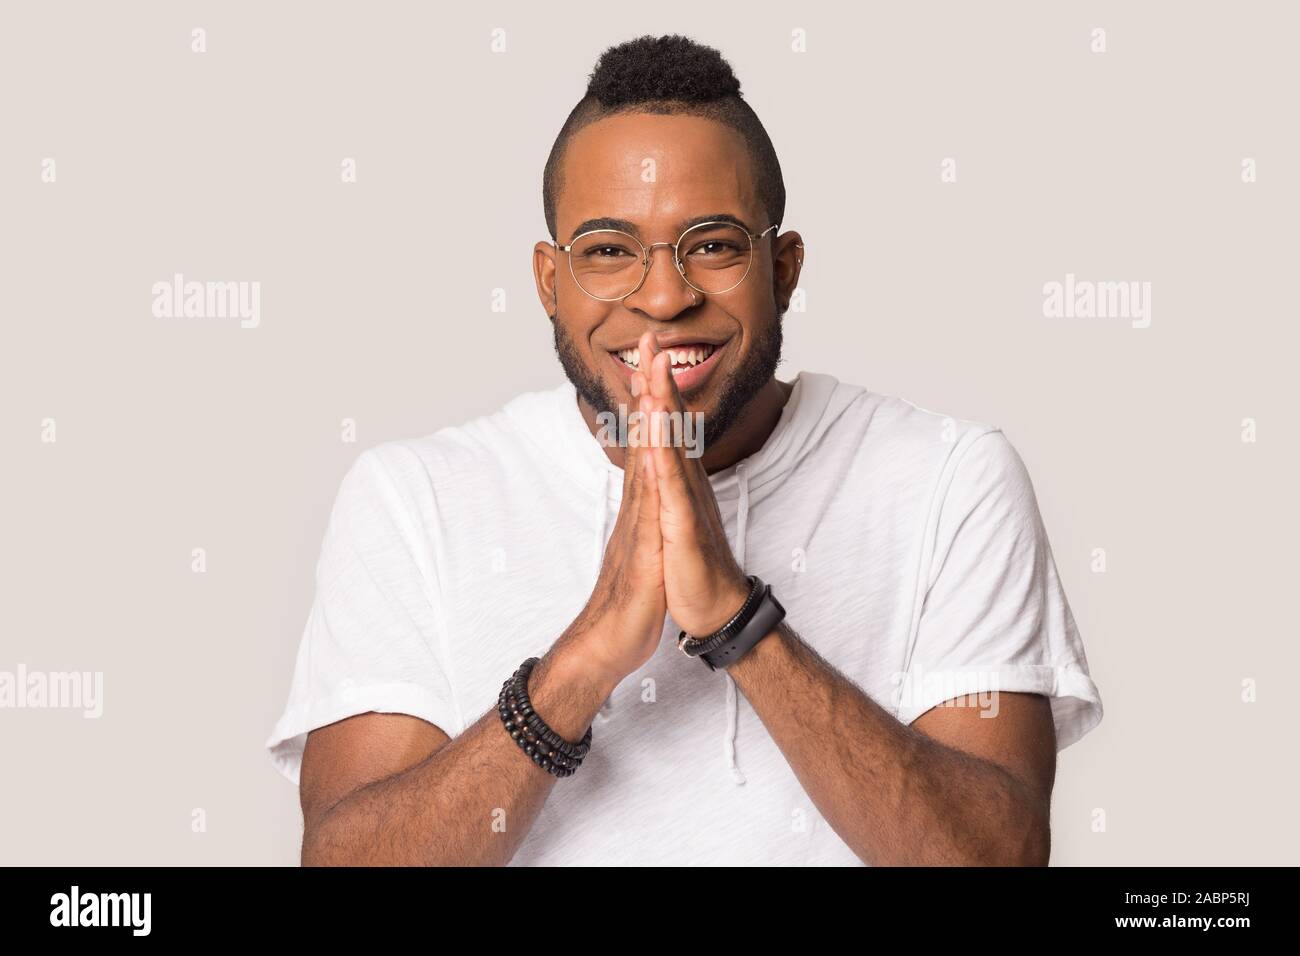 Smiling African American man join hands in anticipation, expectation Stock Photo